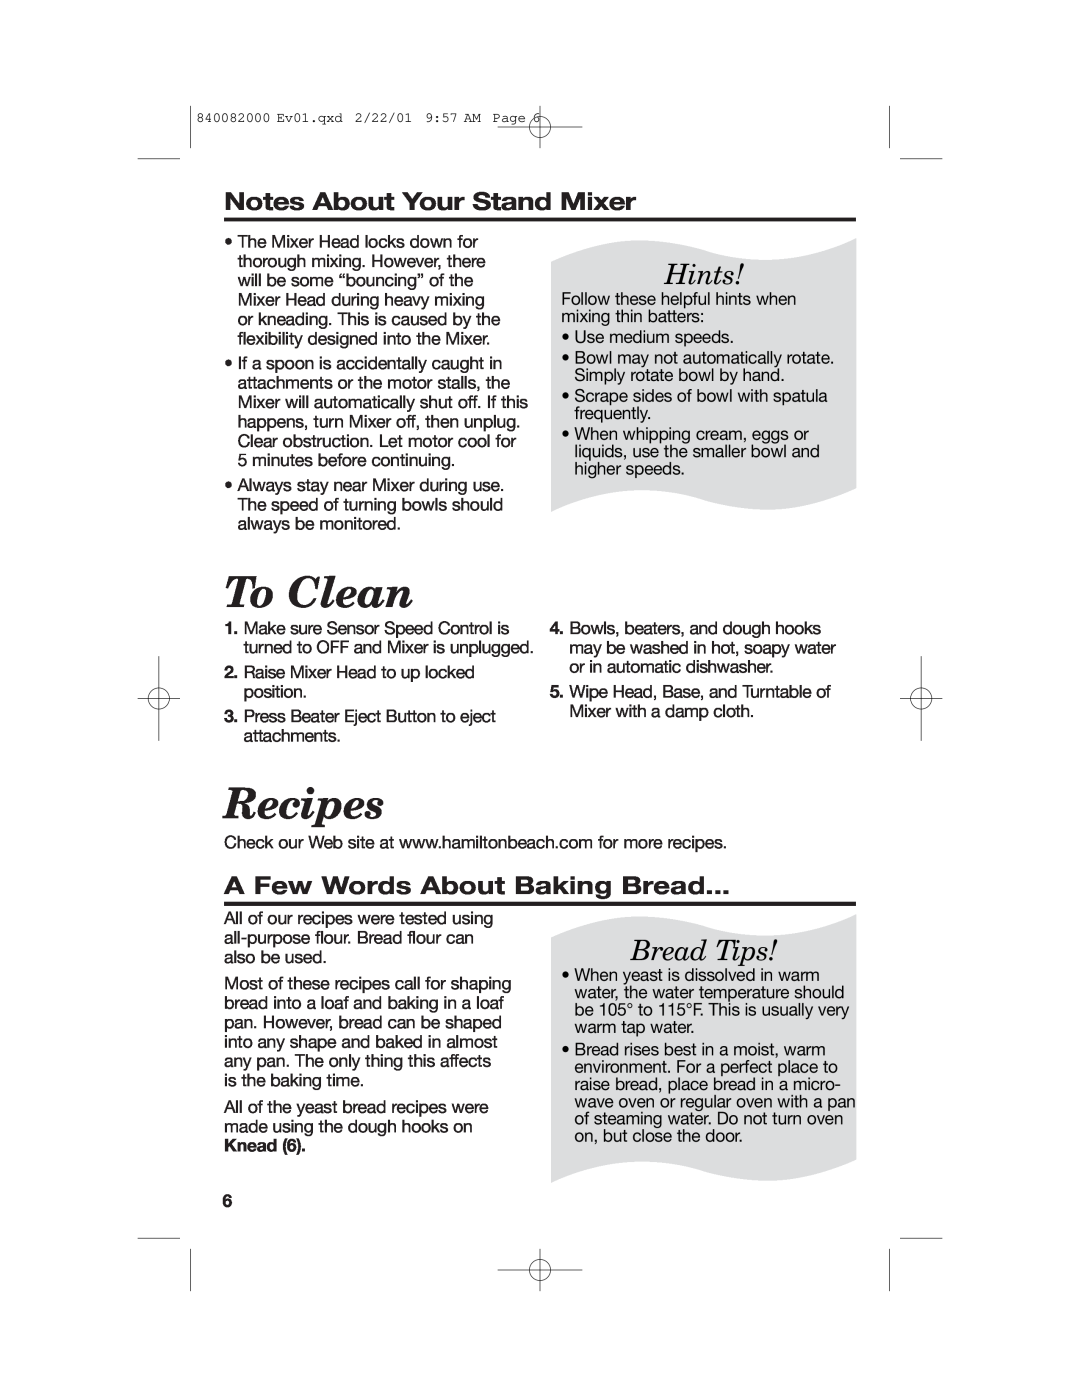 Hamilton Beach 60695 manual To Clean, Recipes, Notes About Your Stand Mixer, A Few Words About Baking Bread, Knead, Hints 